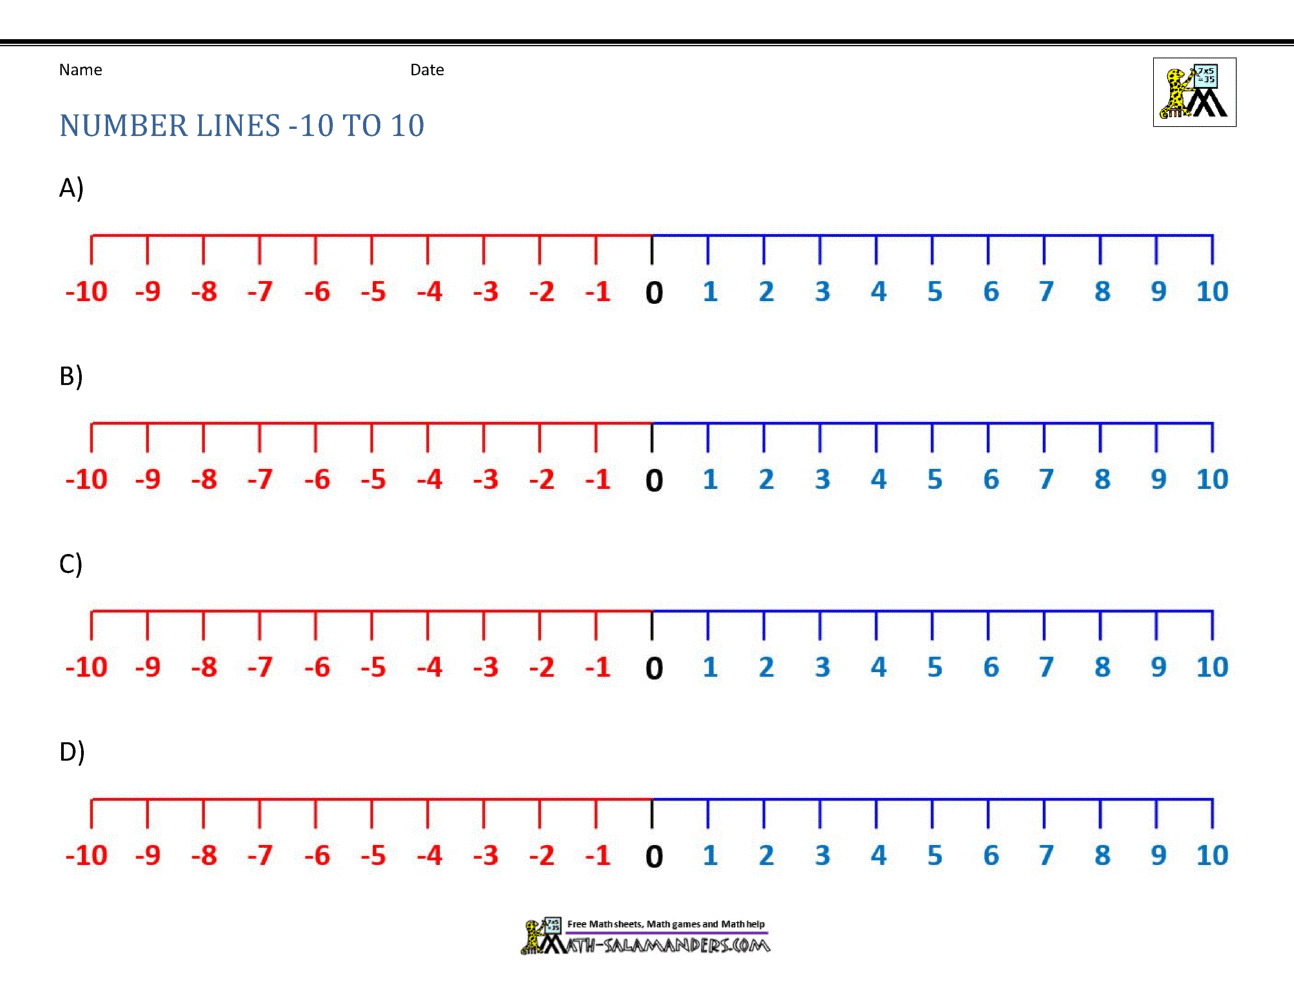 Number Lines from -10 to 10 Landscape.